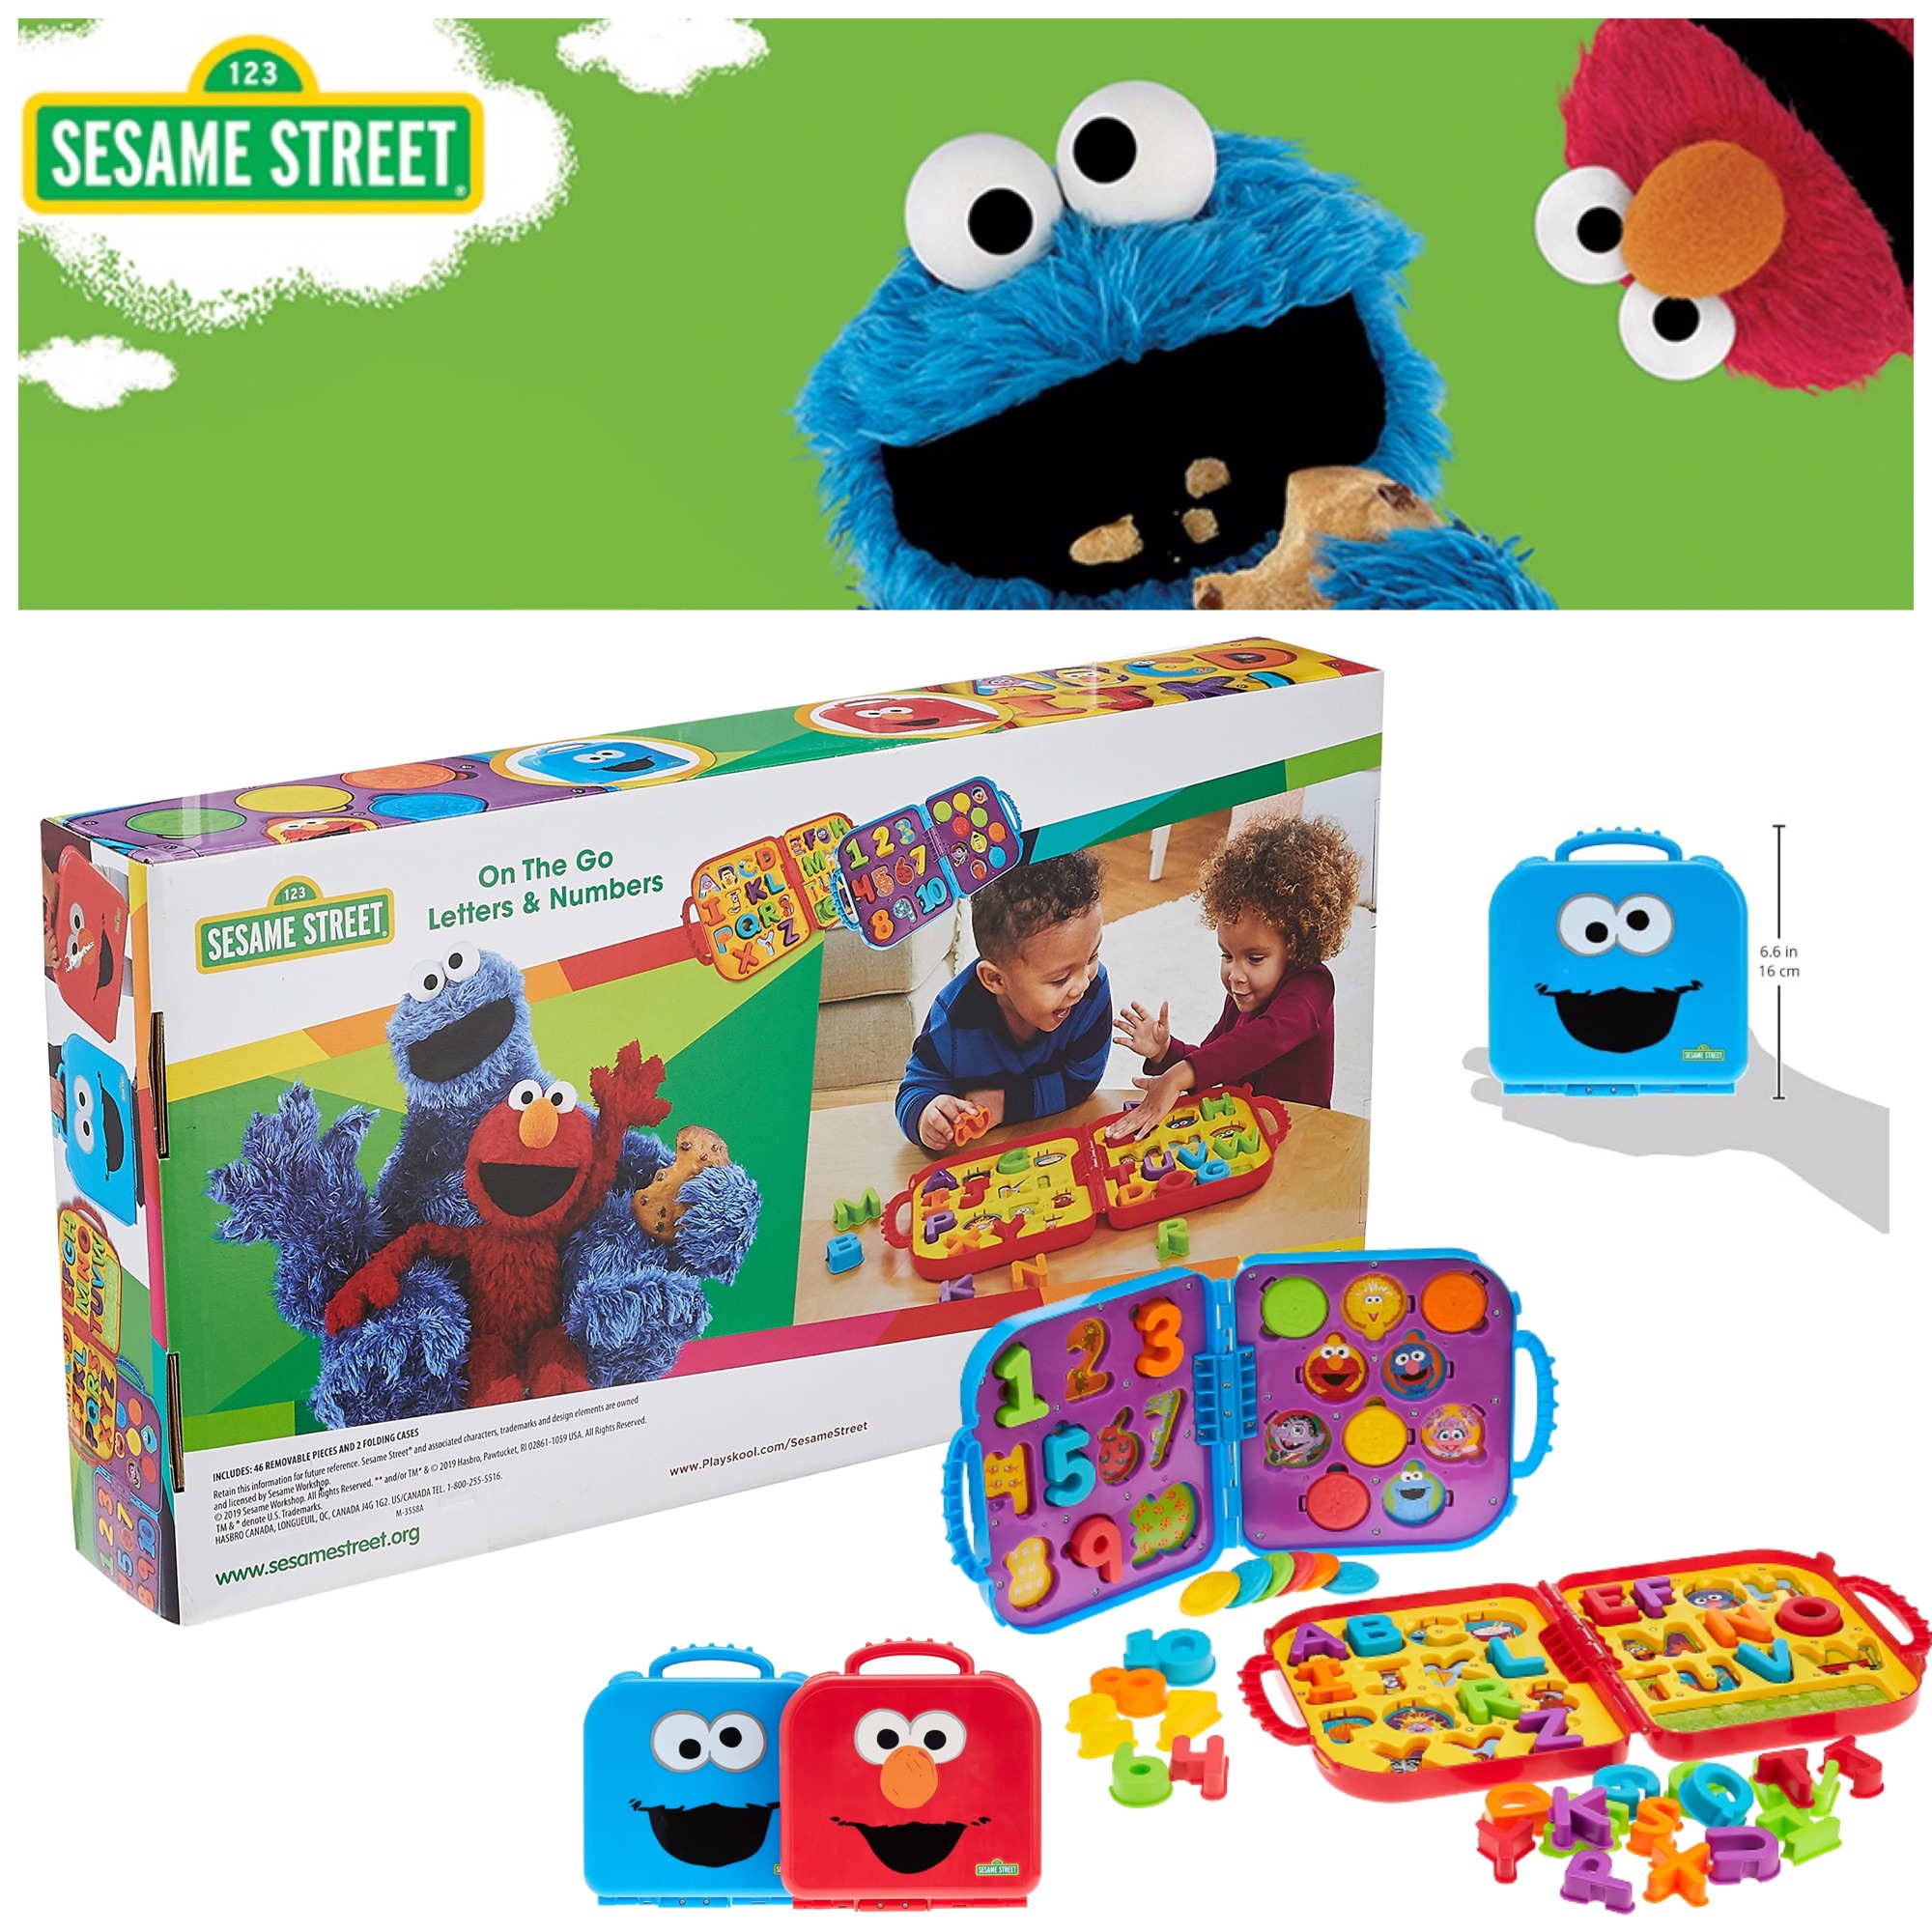 On the Go Letters & Numbers with Elmo & Cookie Monster, 2 Take along Cases,  Lea